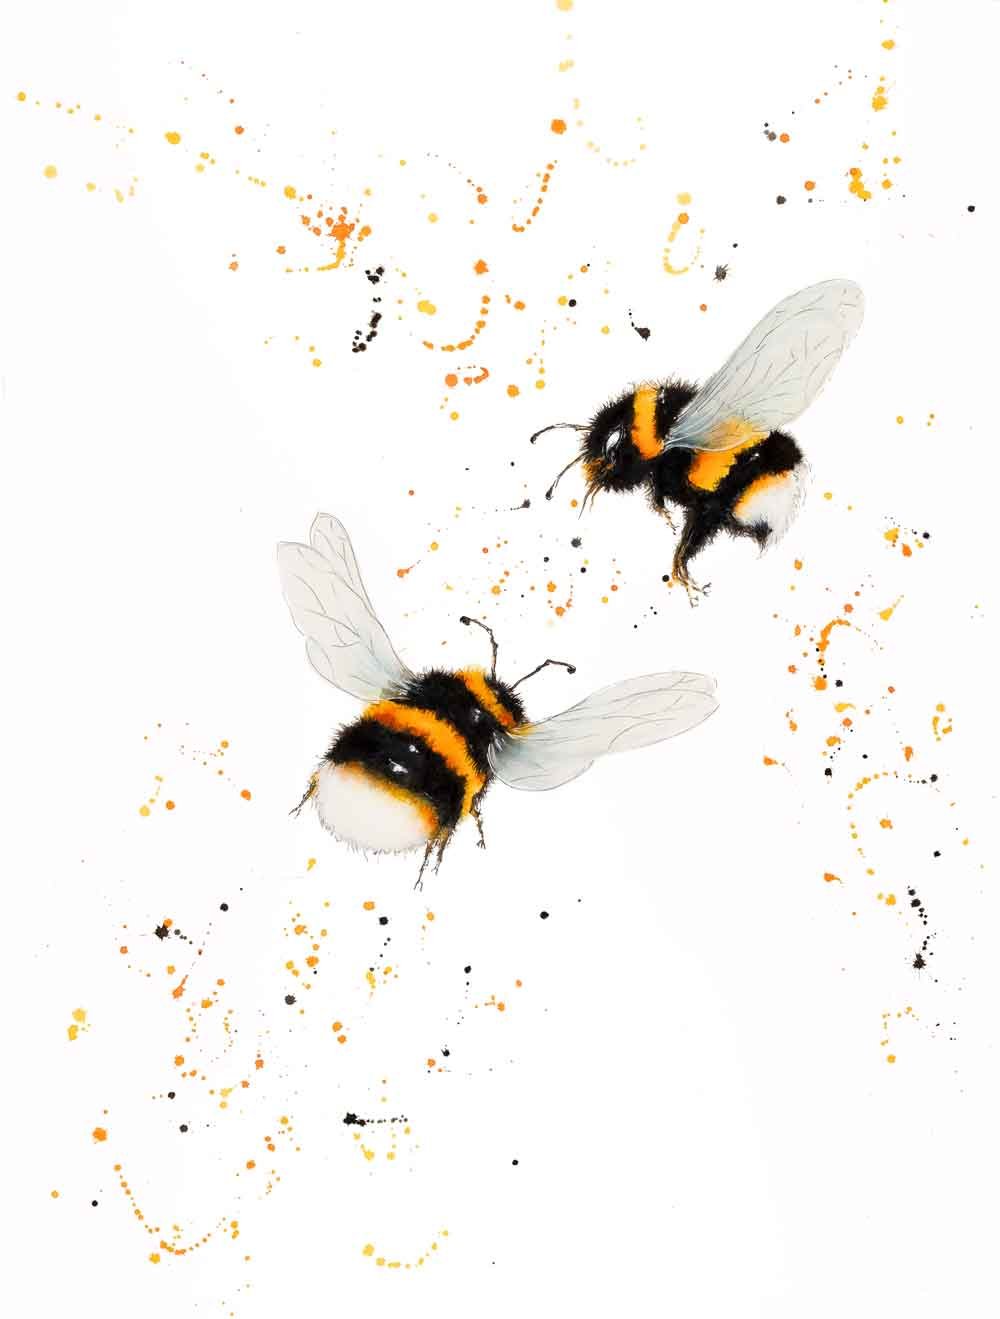 Image of "Dance of the Bumble Bees" - From The CountryLife Collection